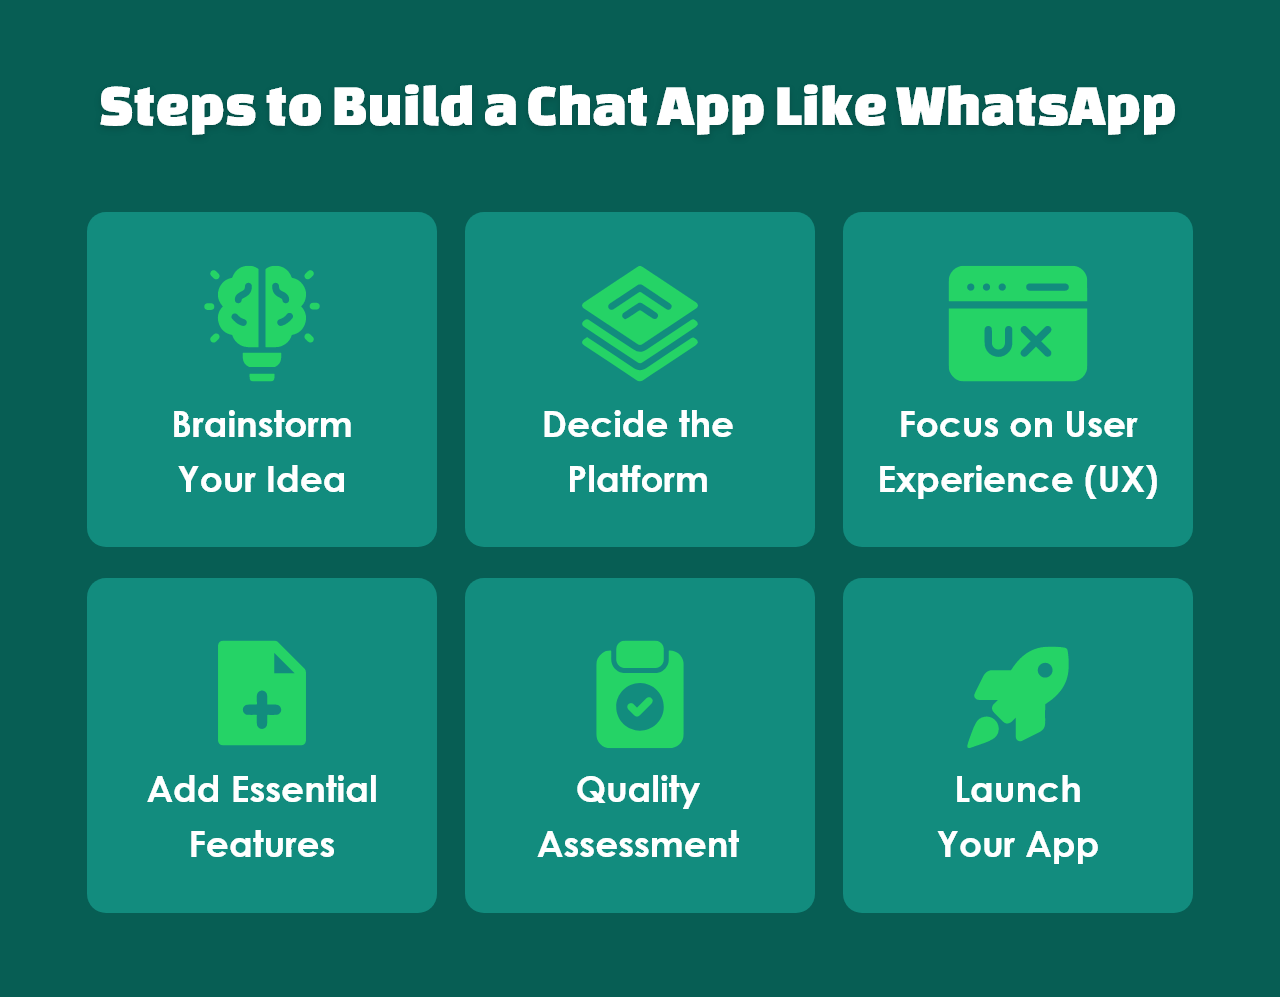 Steps to develop a Chat App Like WhatsApp